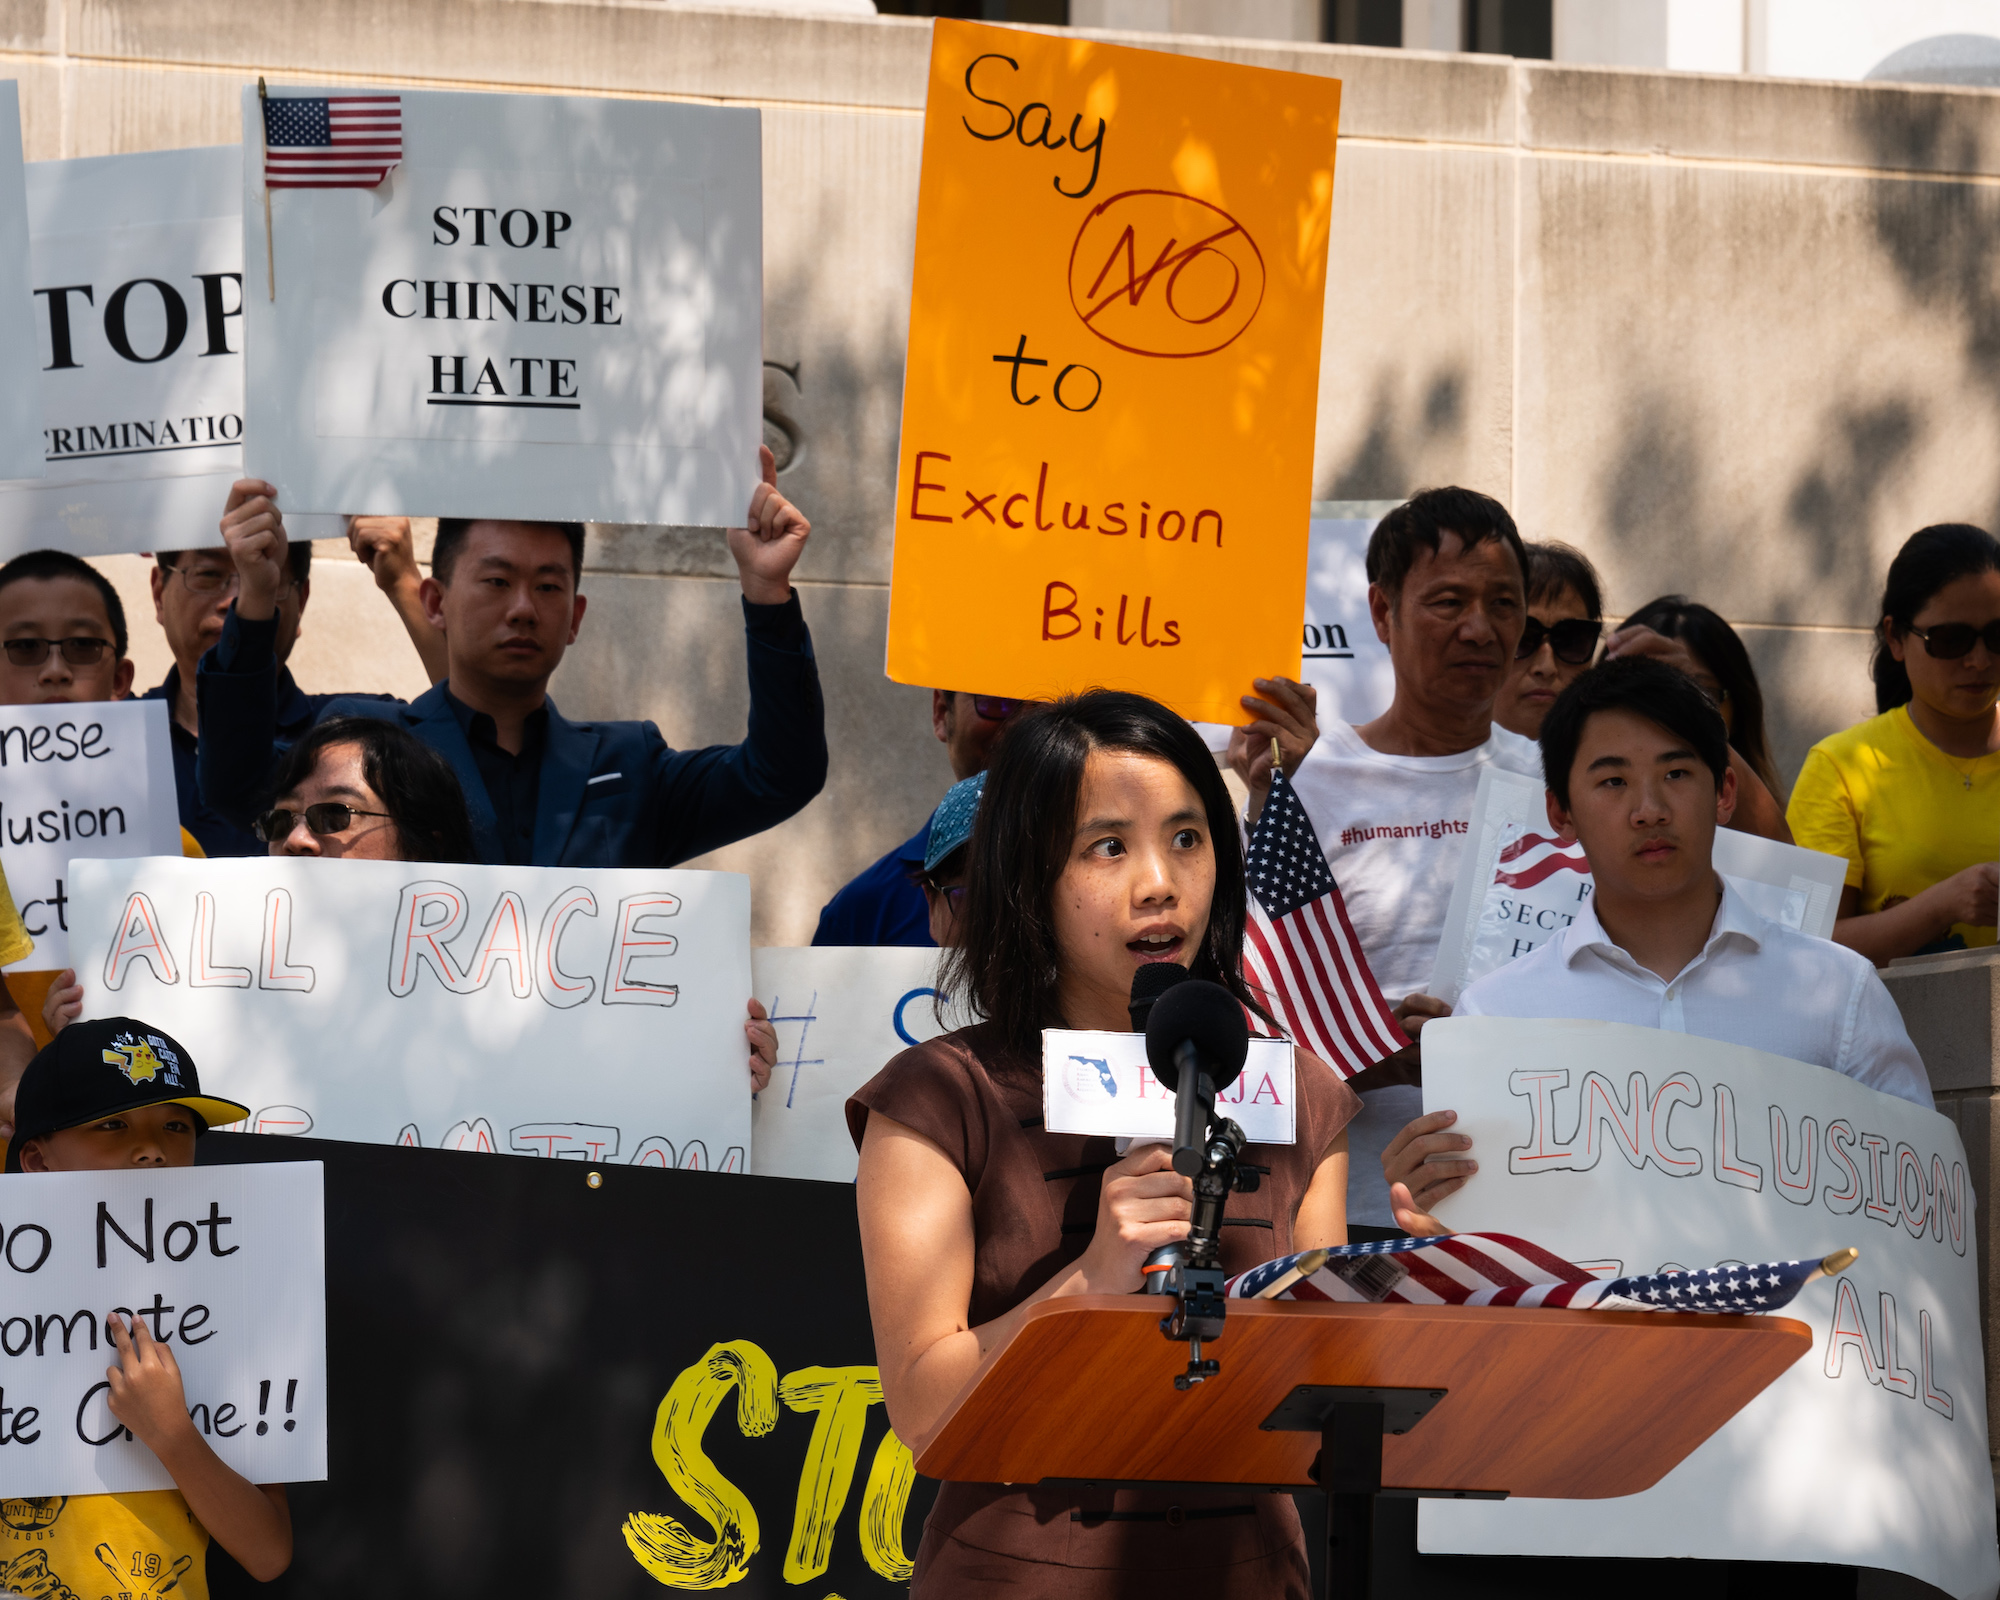 A woman speaks in front of a crowd with signs advocating against race-based violence in the name of national security.